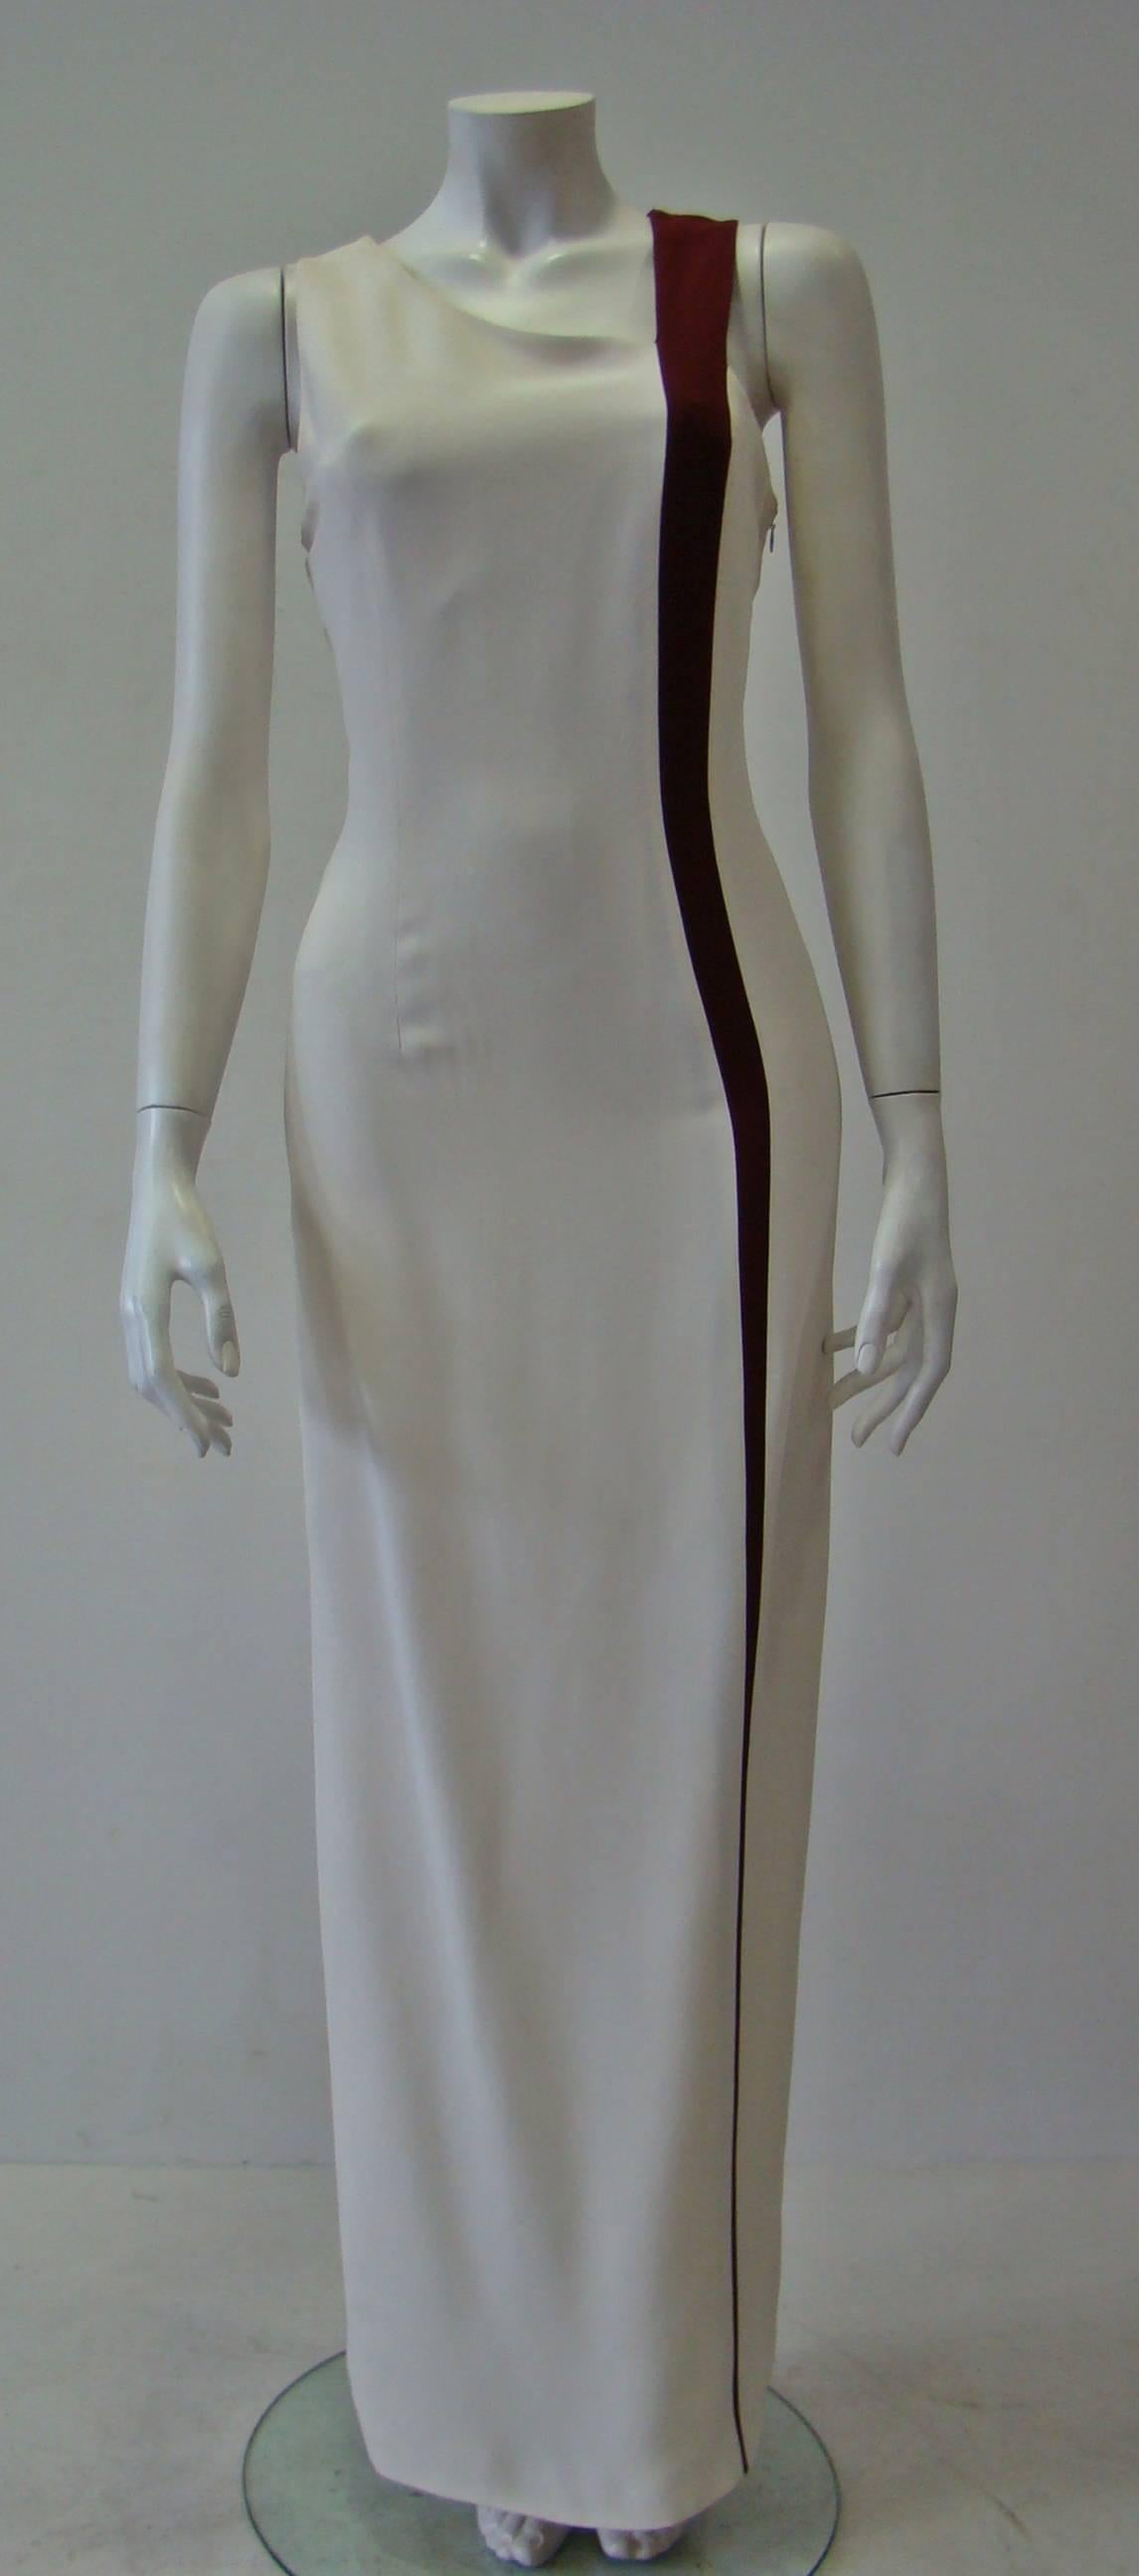 A Rare White Bodycon Evening Gown From Angelo Mozzillo Accented With A Burgundy Front And Back Side Seam For An Elongating Effect And A Back Seam Split For A Cool Silhouette. A Sleeveless Maxi Dress Featuring A Concealed Zip Fastening At Side And